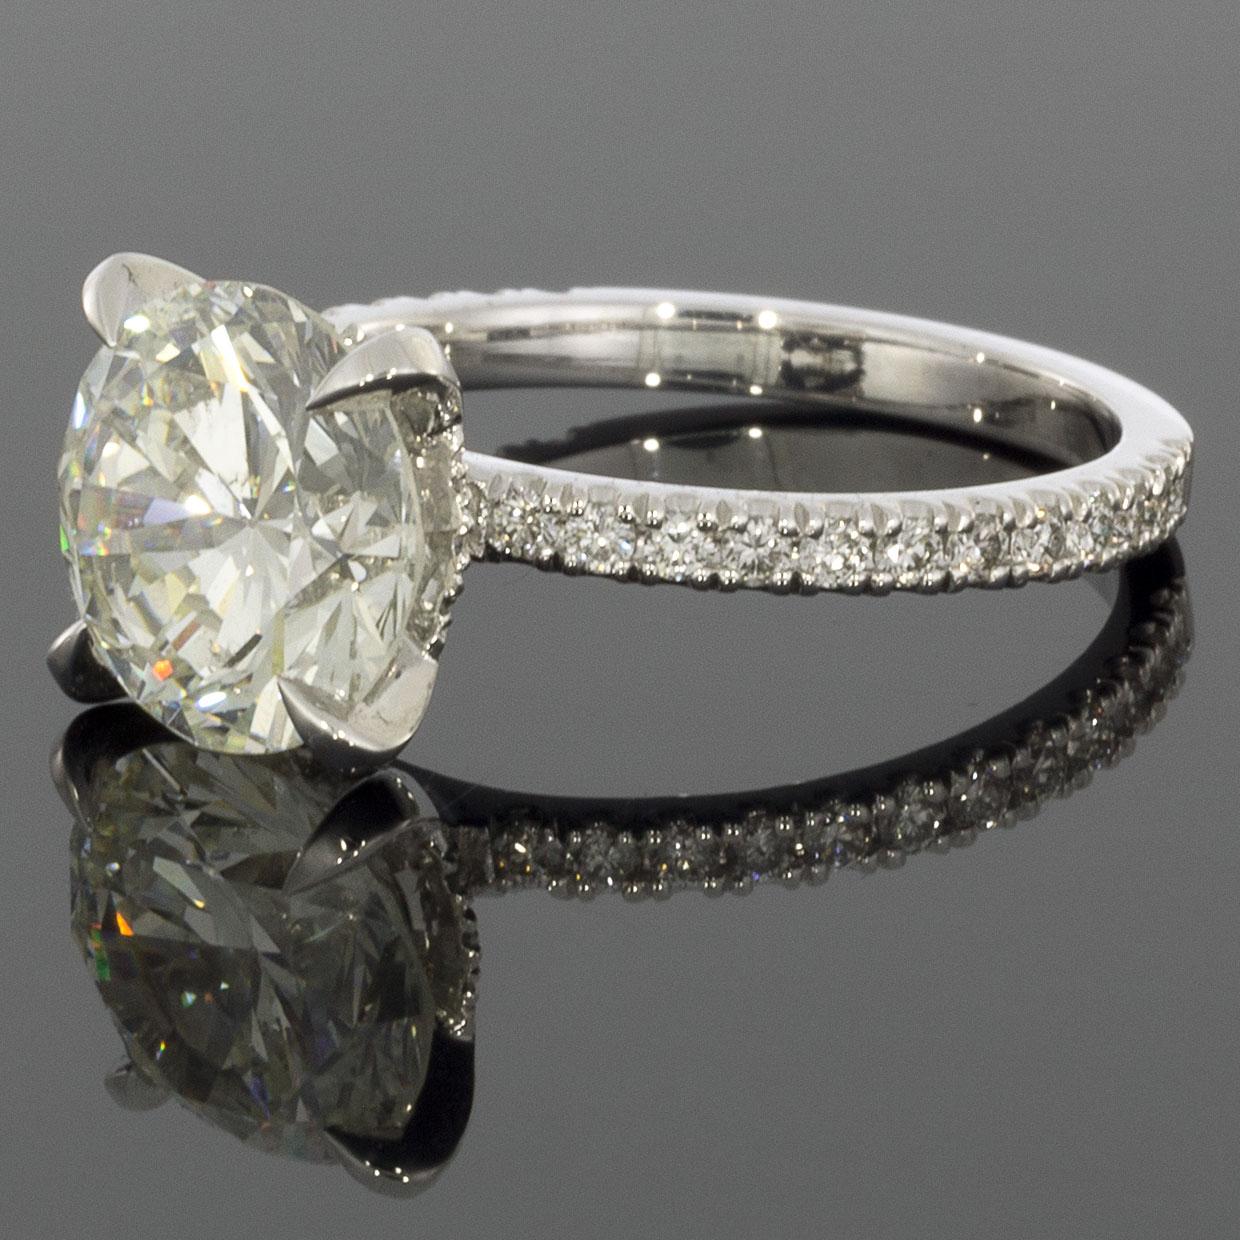 Item Details:
Estimated Retail - $30,000.00
Metal - 950 Platinum
Total Carat Weight (TCW) - 3.36 ctw
Certification/Grading - GIA
Style - Solitaire With Accents
Ring Size - 6.50
Sizable - Yes
Width - 2.00 mm

Stone 1 Information:
Stone Type -